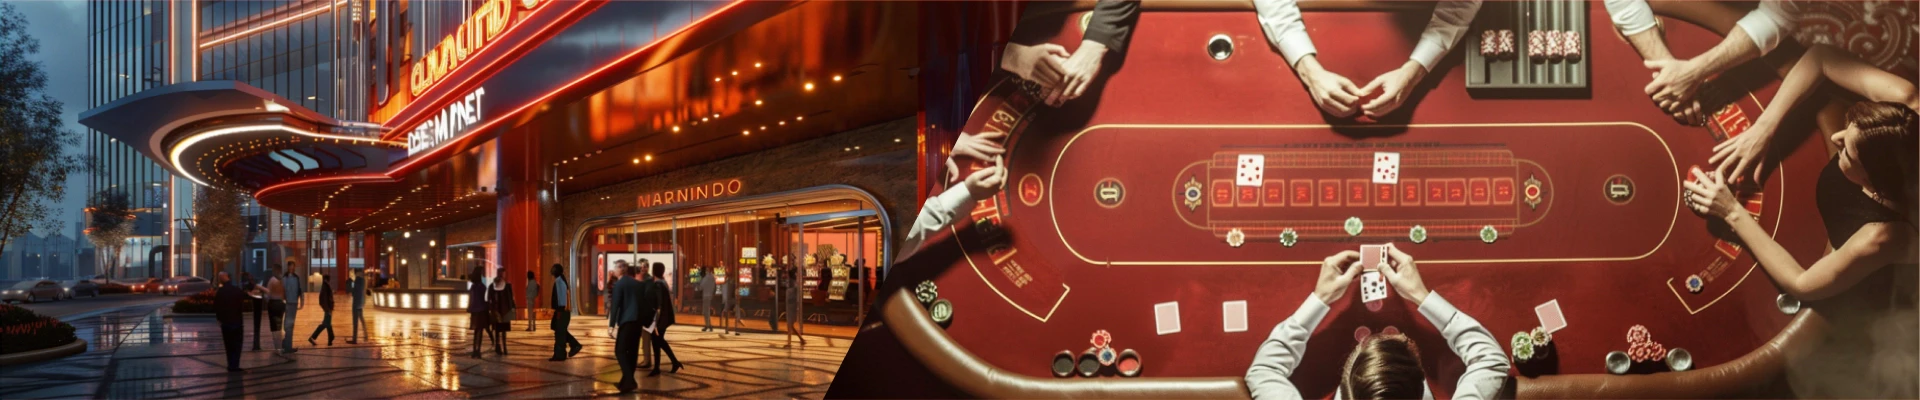 Applications for casino expansion to be approved in Vancouver